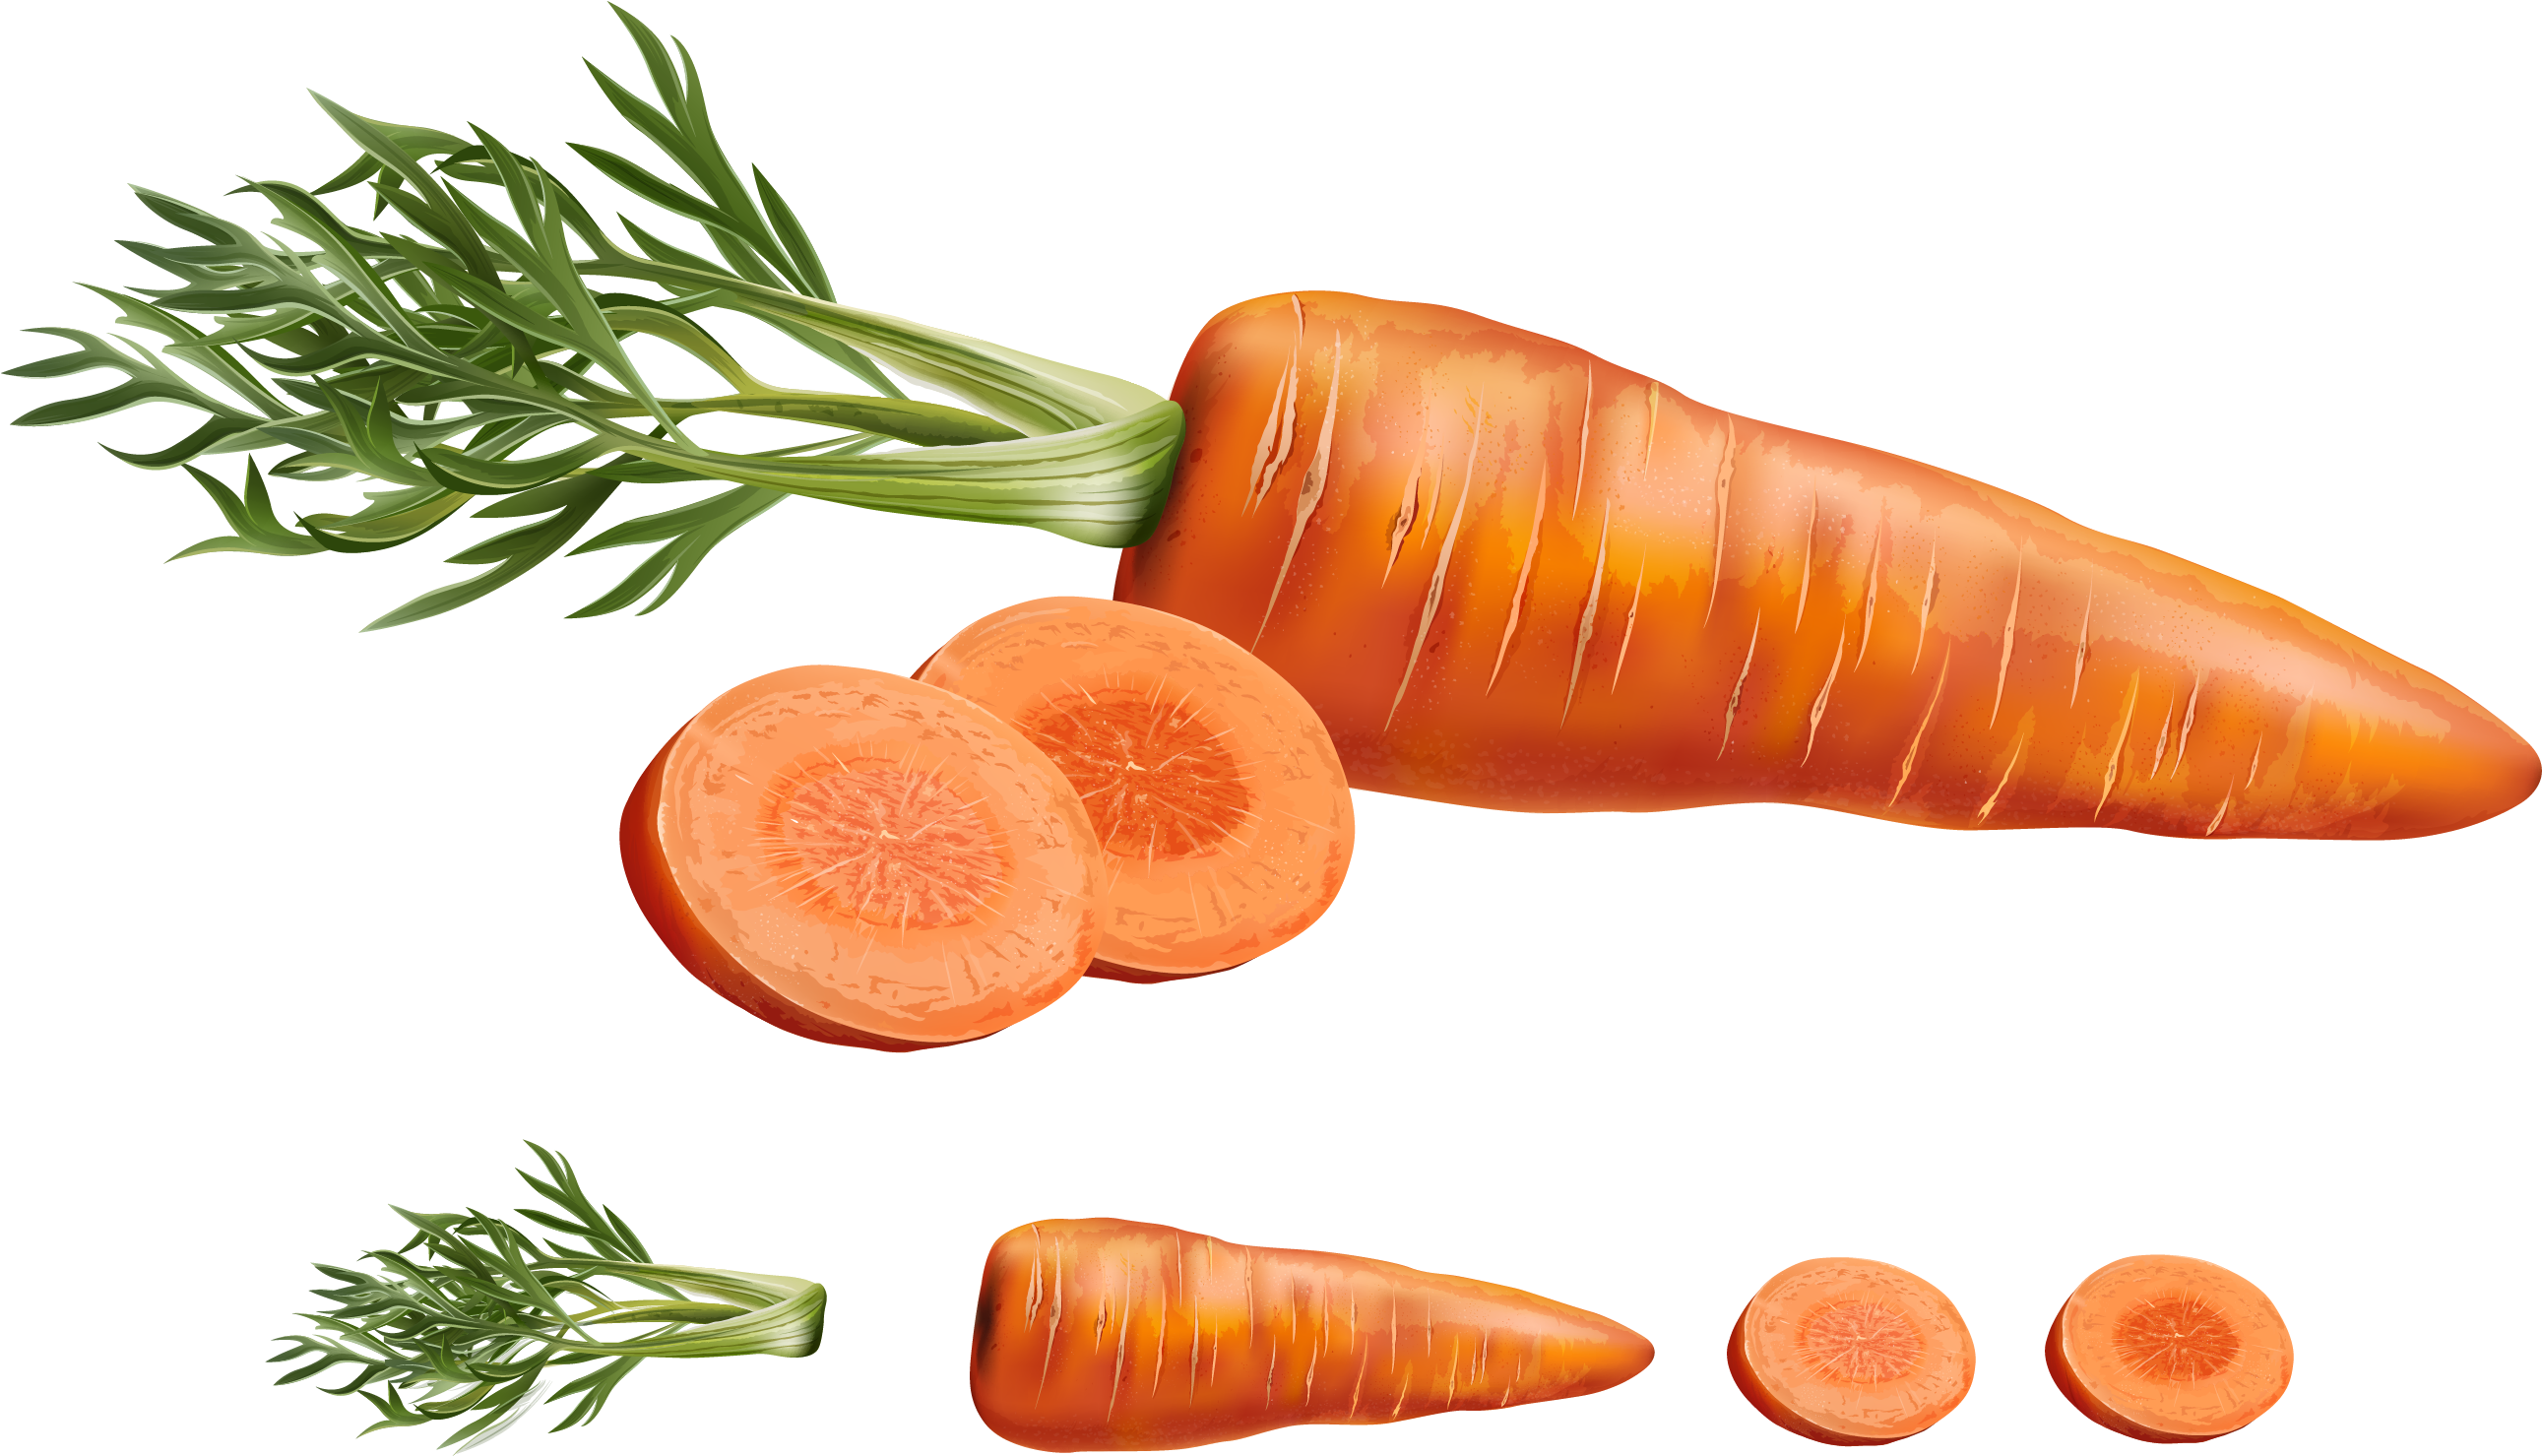 Slice Carrot Slices PNG Image High Quality PNG Image